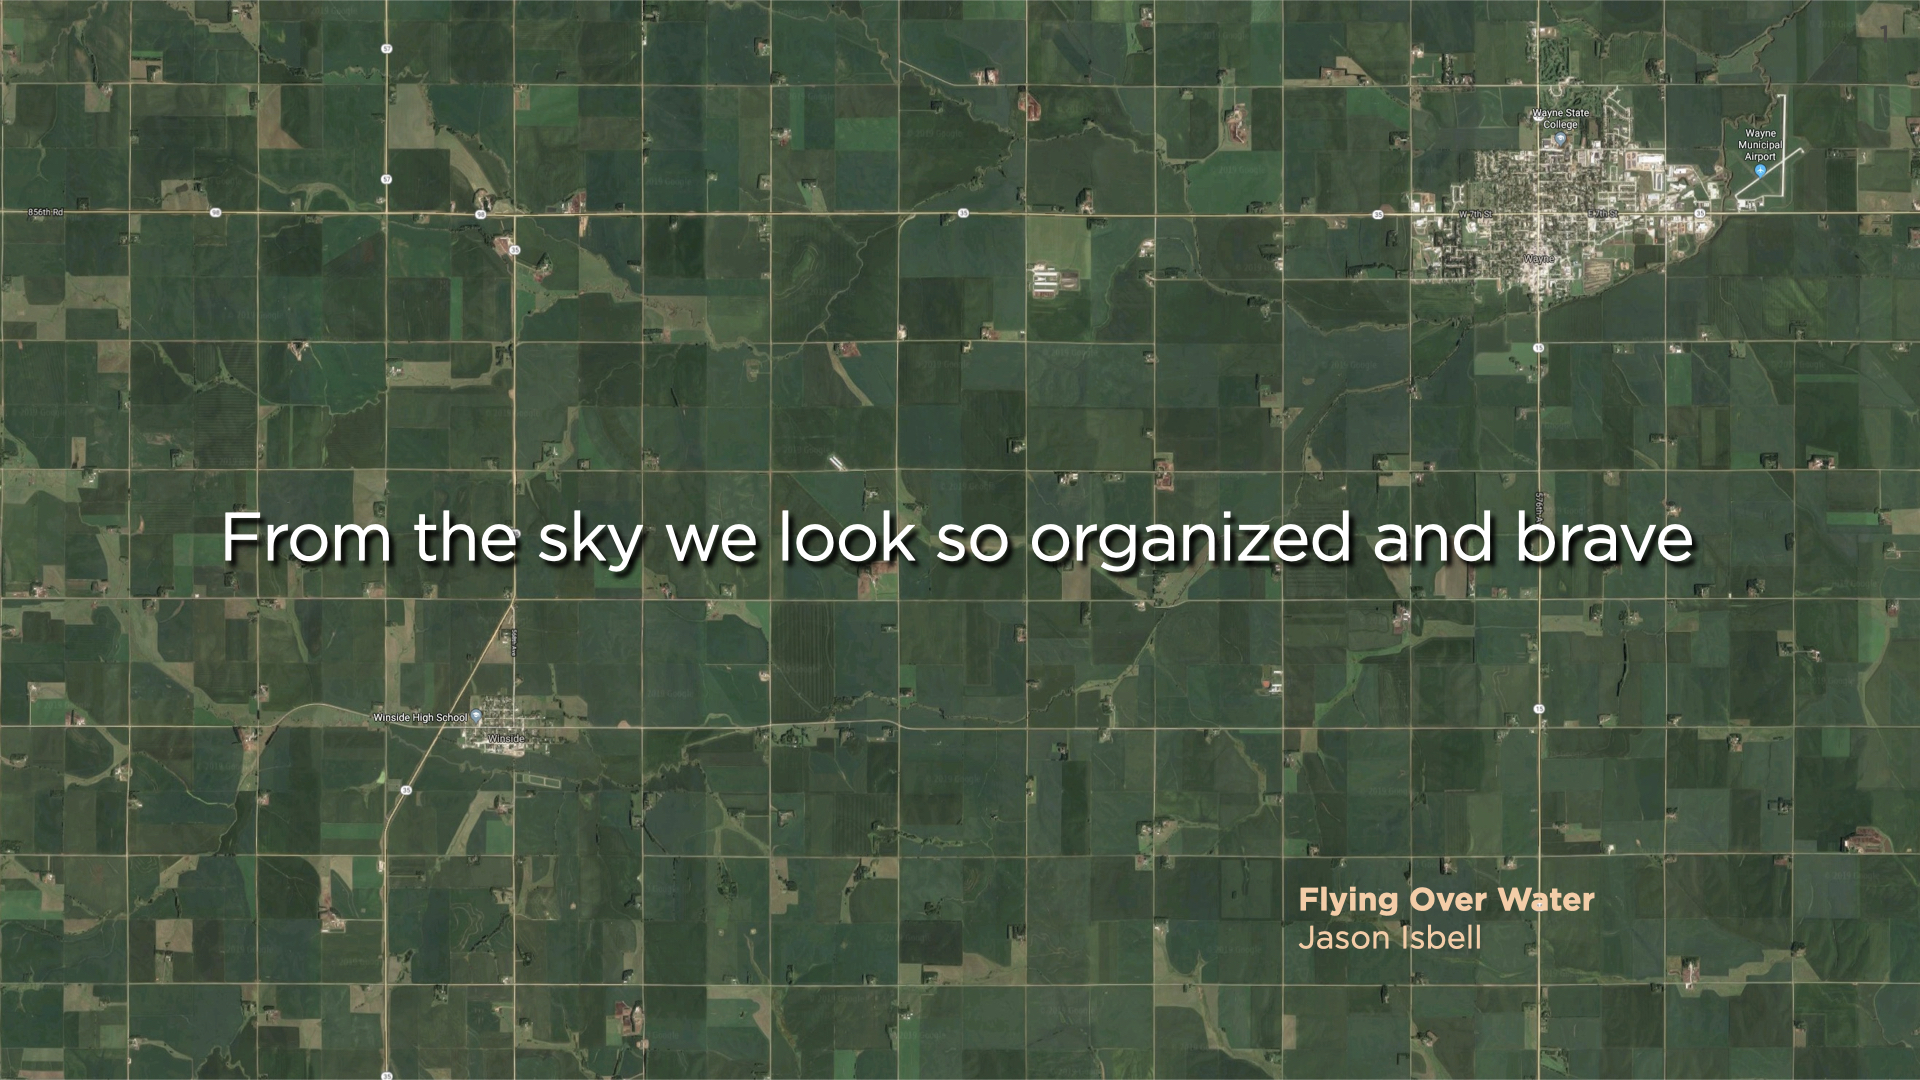 From The Sky We Look So Organized and Brave